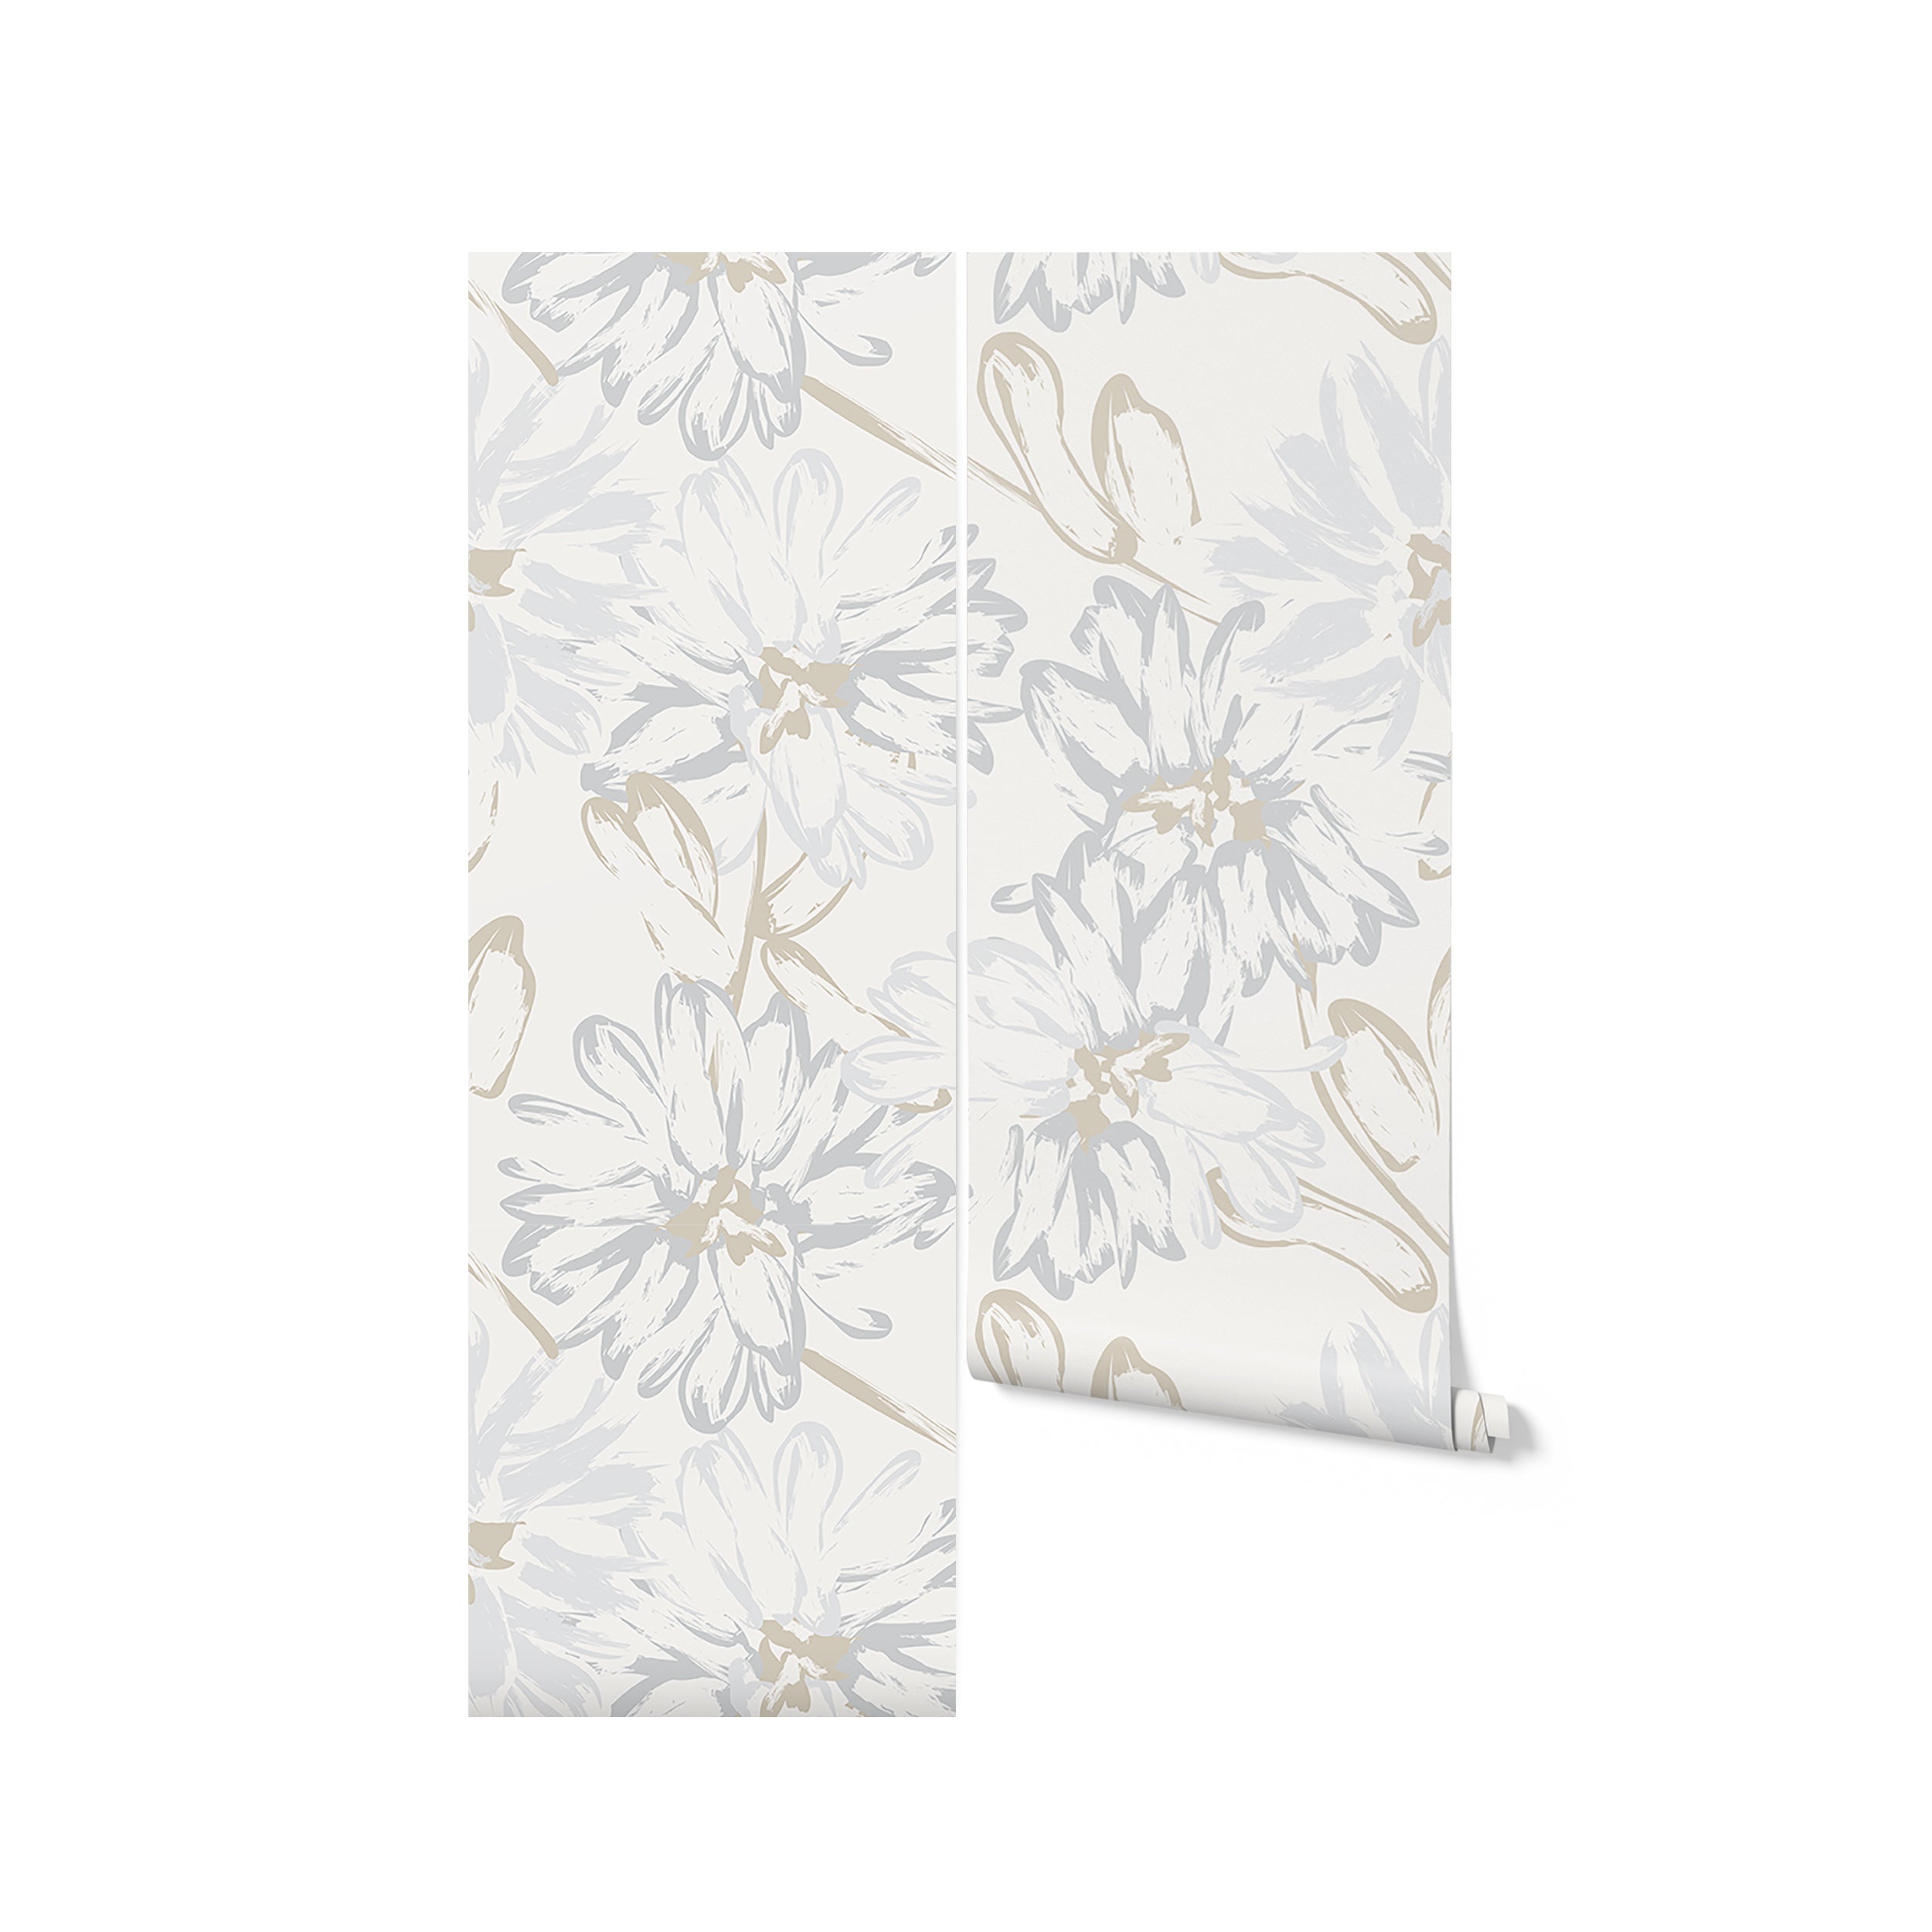 A roll of Modernist Meadows Wallpaper, partially unrolled to reveal the detailed floral design in gray and beige. The wallpaper's elegant pattern offers a fresh and contemporary look, ideal for transforming walls into stunning focal points in any room.